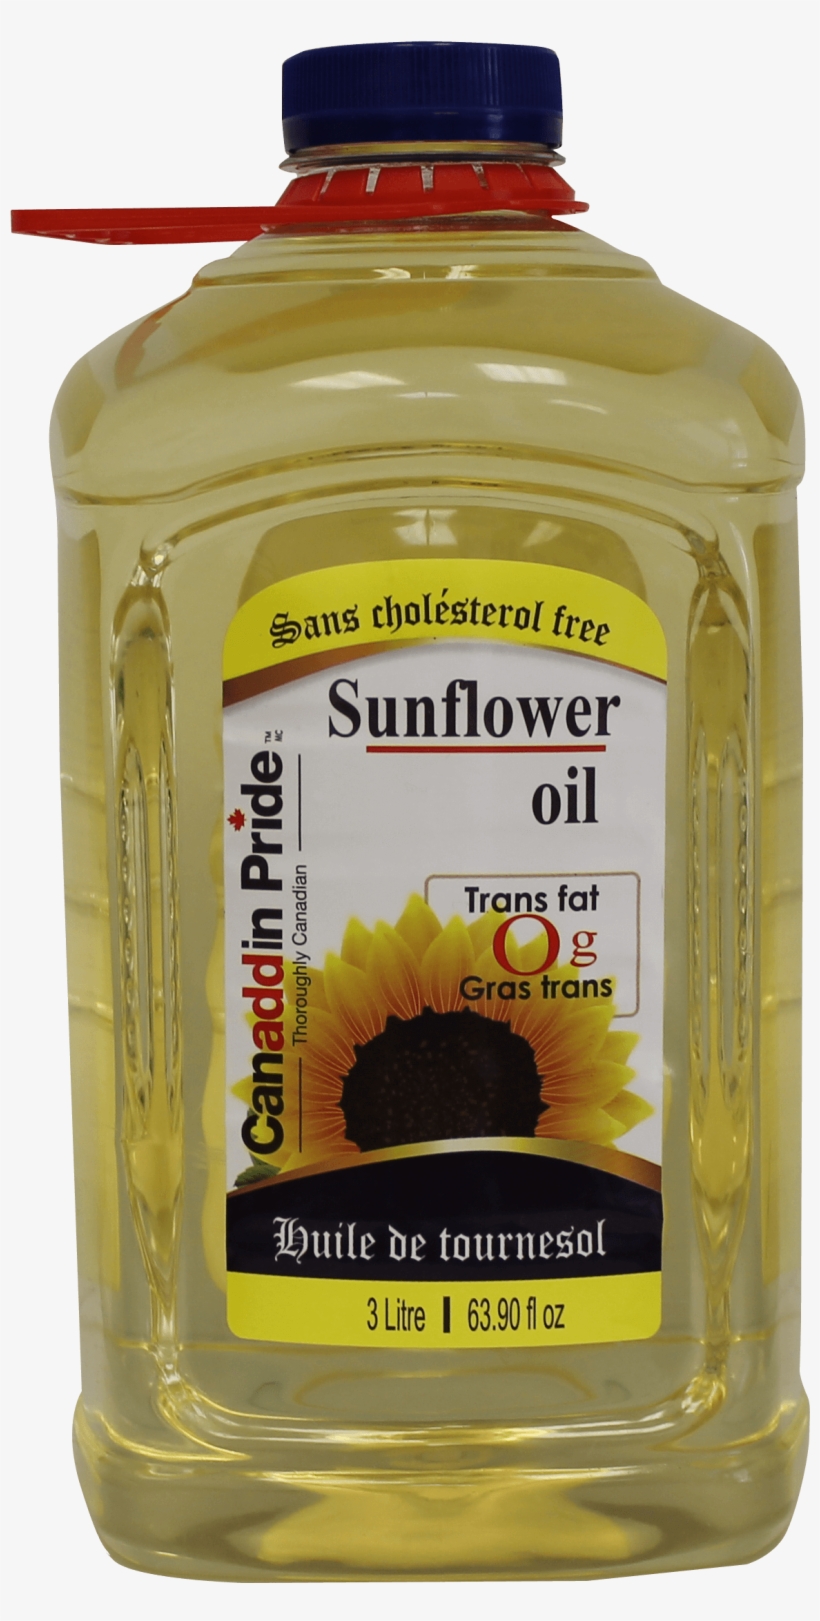 3 Litre Sample - Sunflower Oil Manufacturers In Canada, transparent png #9073479